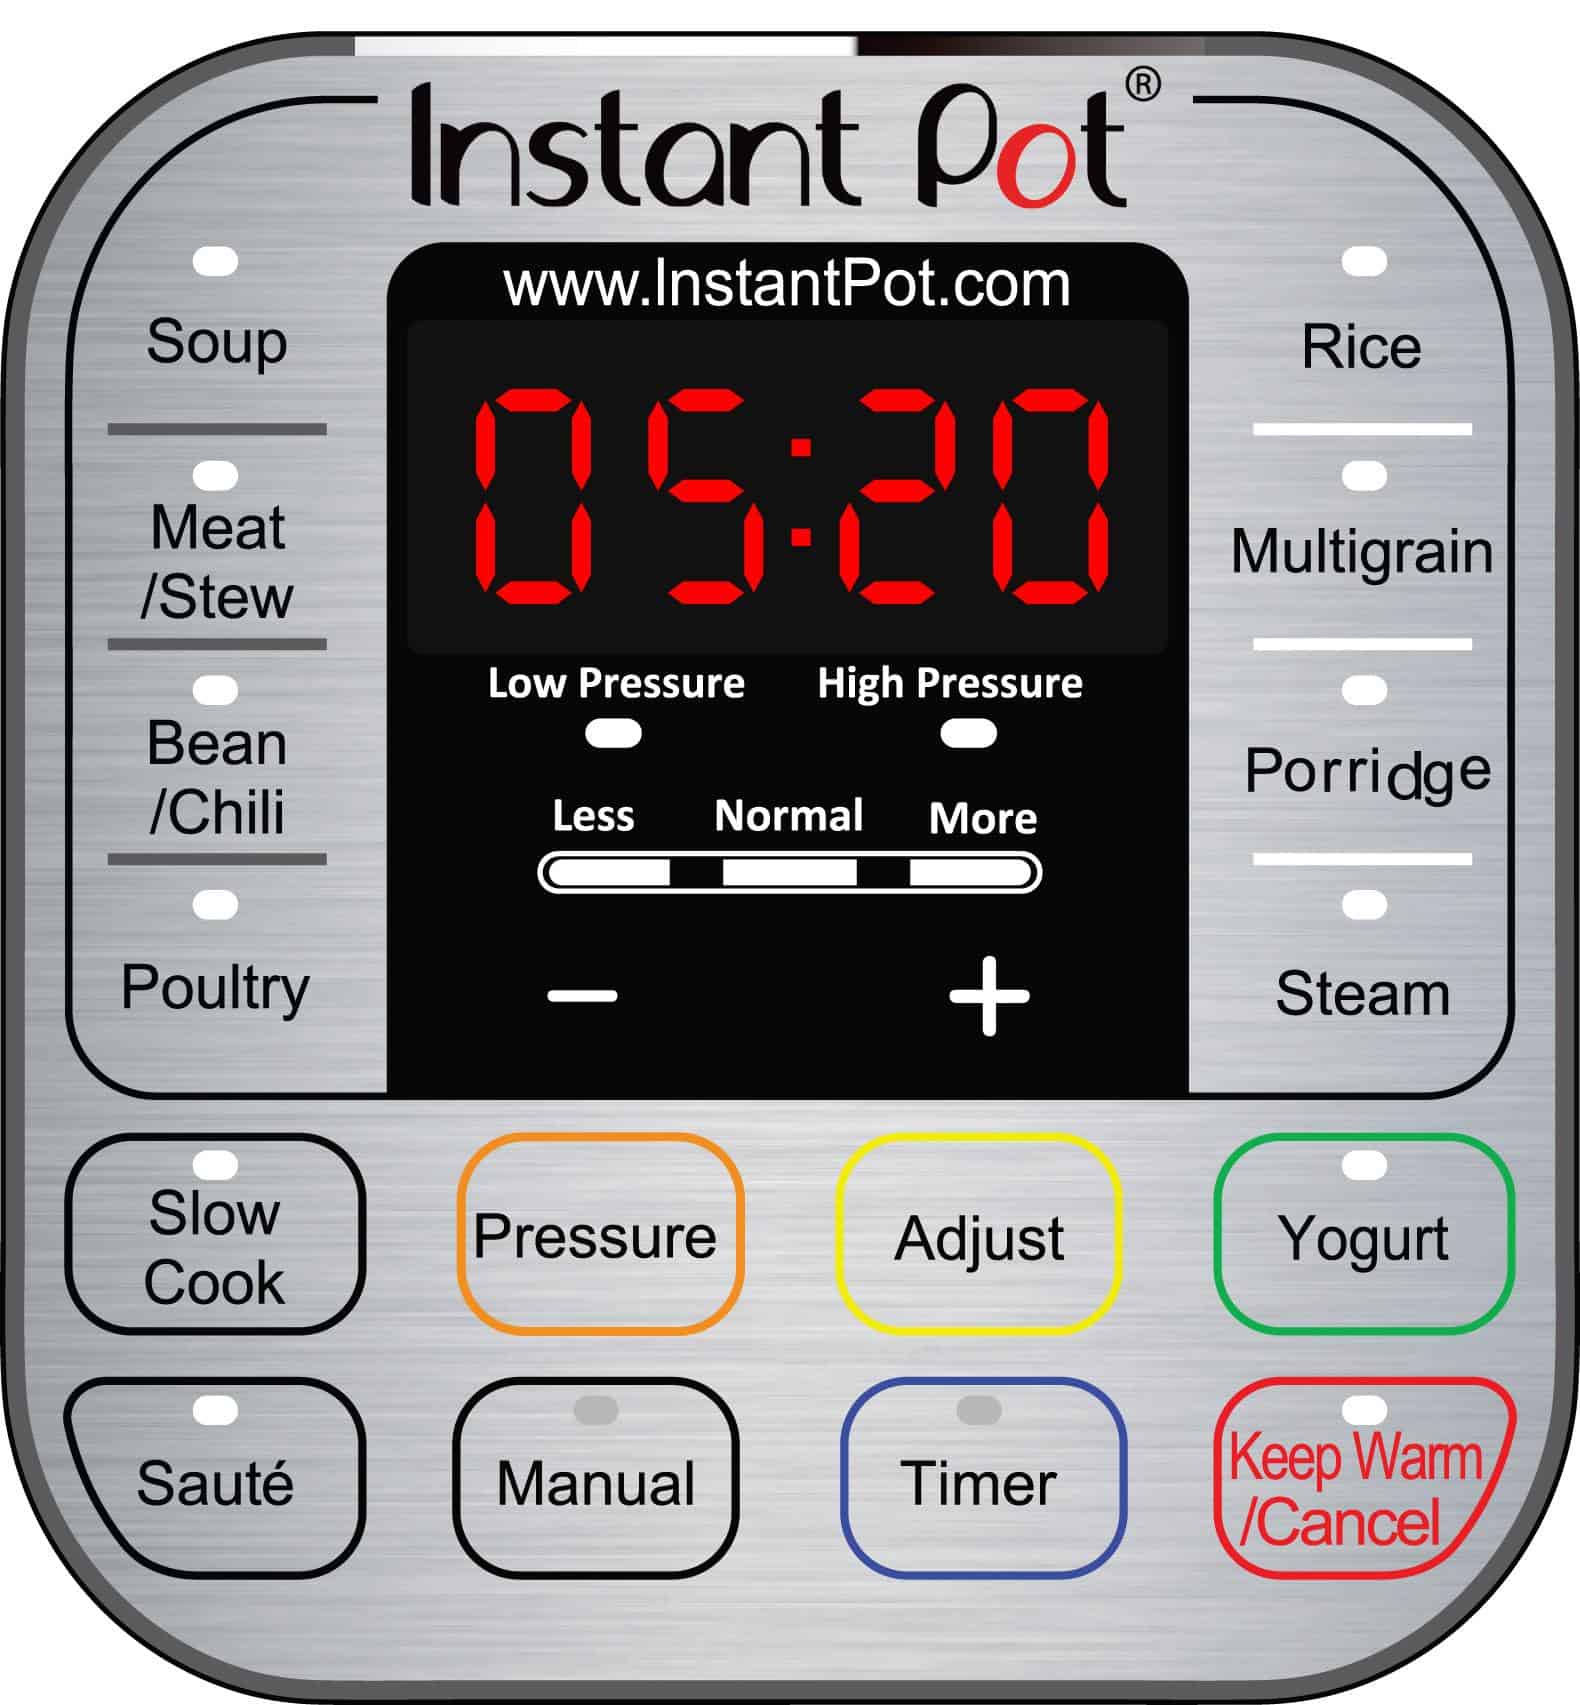 Instant Pot is rated as the #1 pressure cooker for many reasons but do you really need one? Read this Instant Pot Pressure Cooker review to find out..